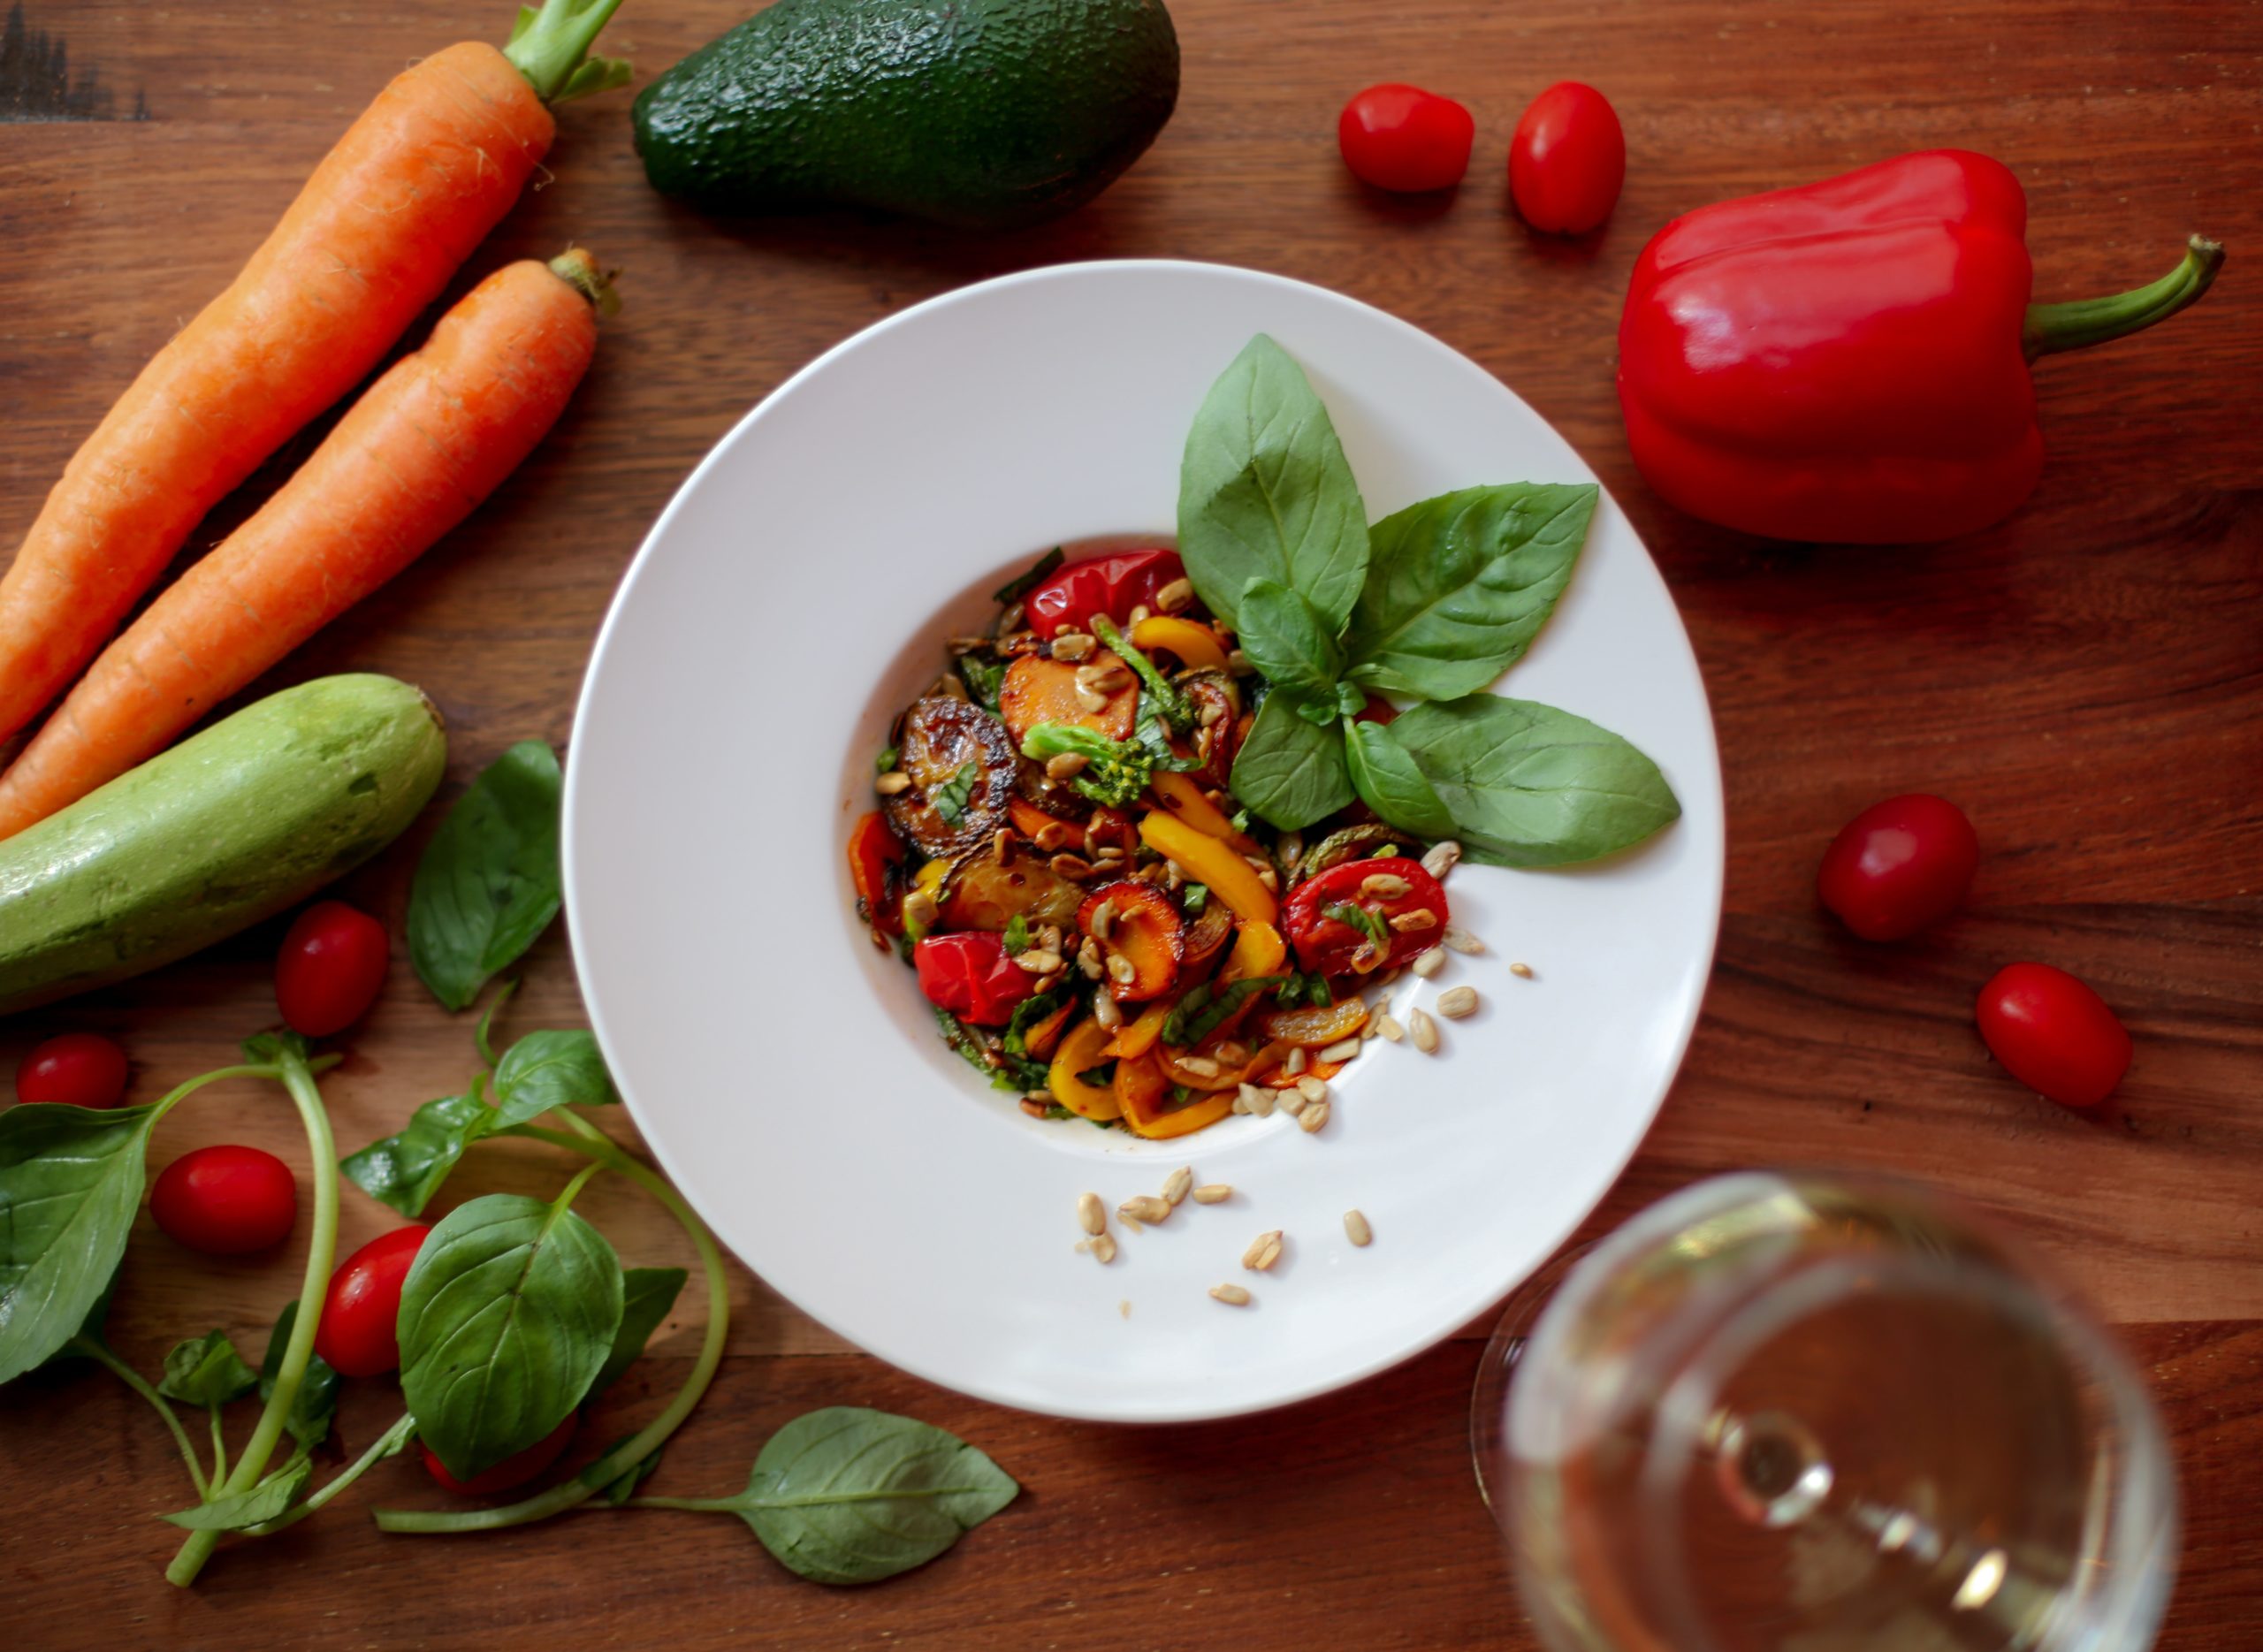 4 Ways to Improve Your Health with a Plant-Based Diet (+ 2 Yummy Plant-Based Recipes)